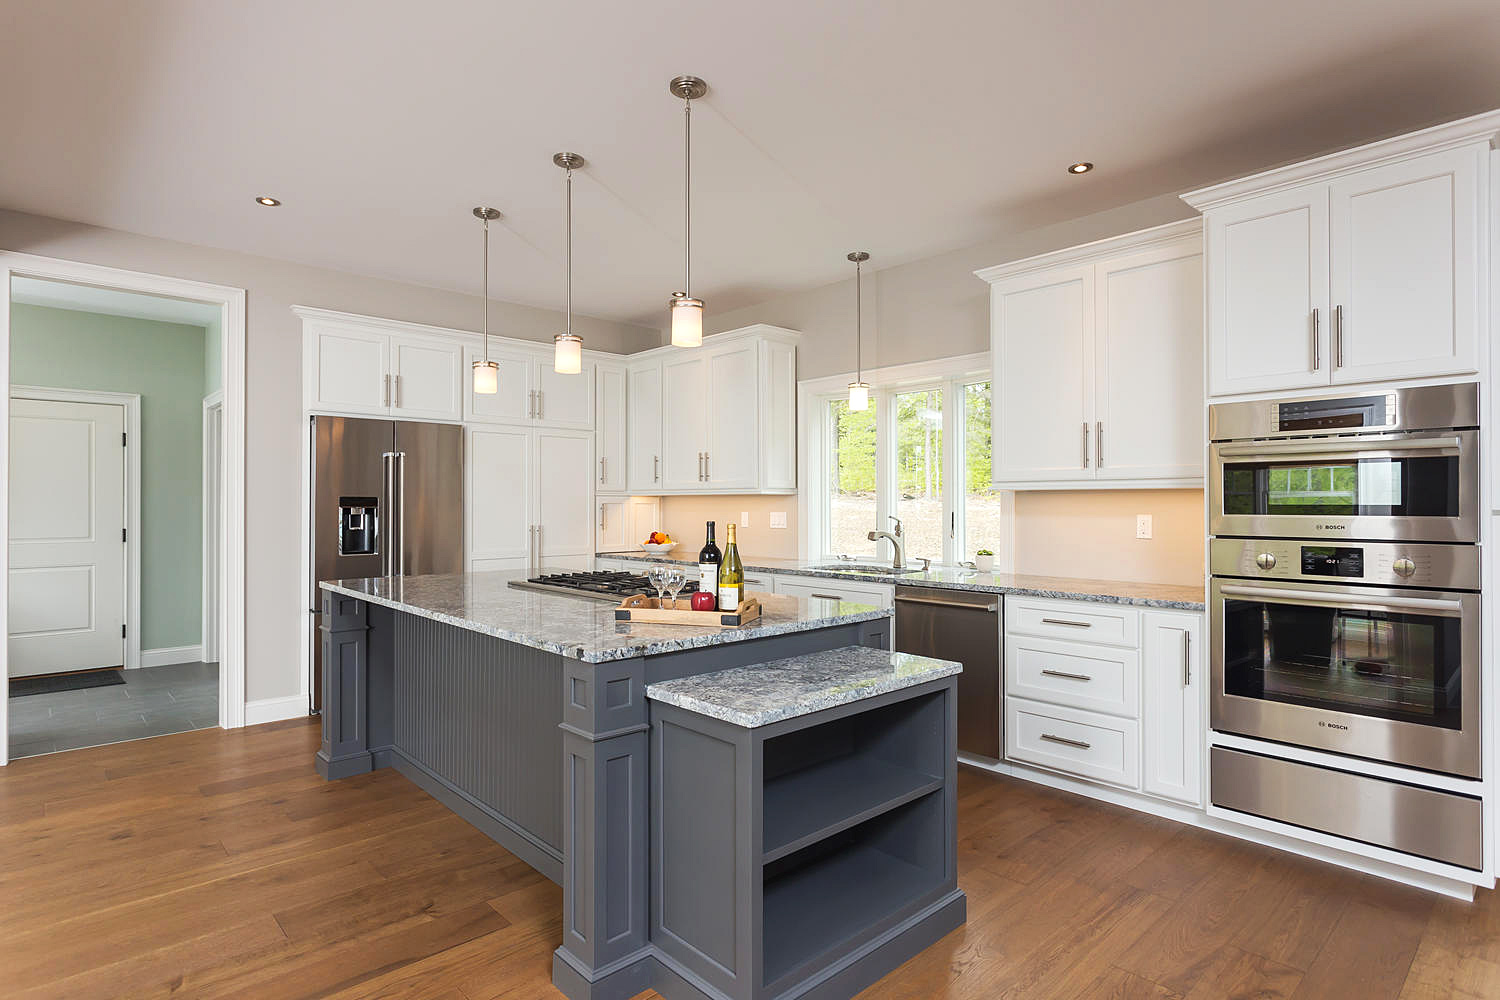 Painted Cabinets with Contrasting Custom Island by Walpole Cabinetry